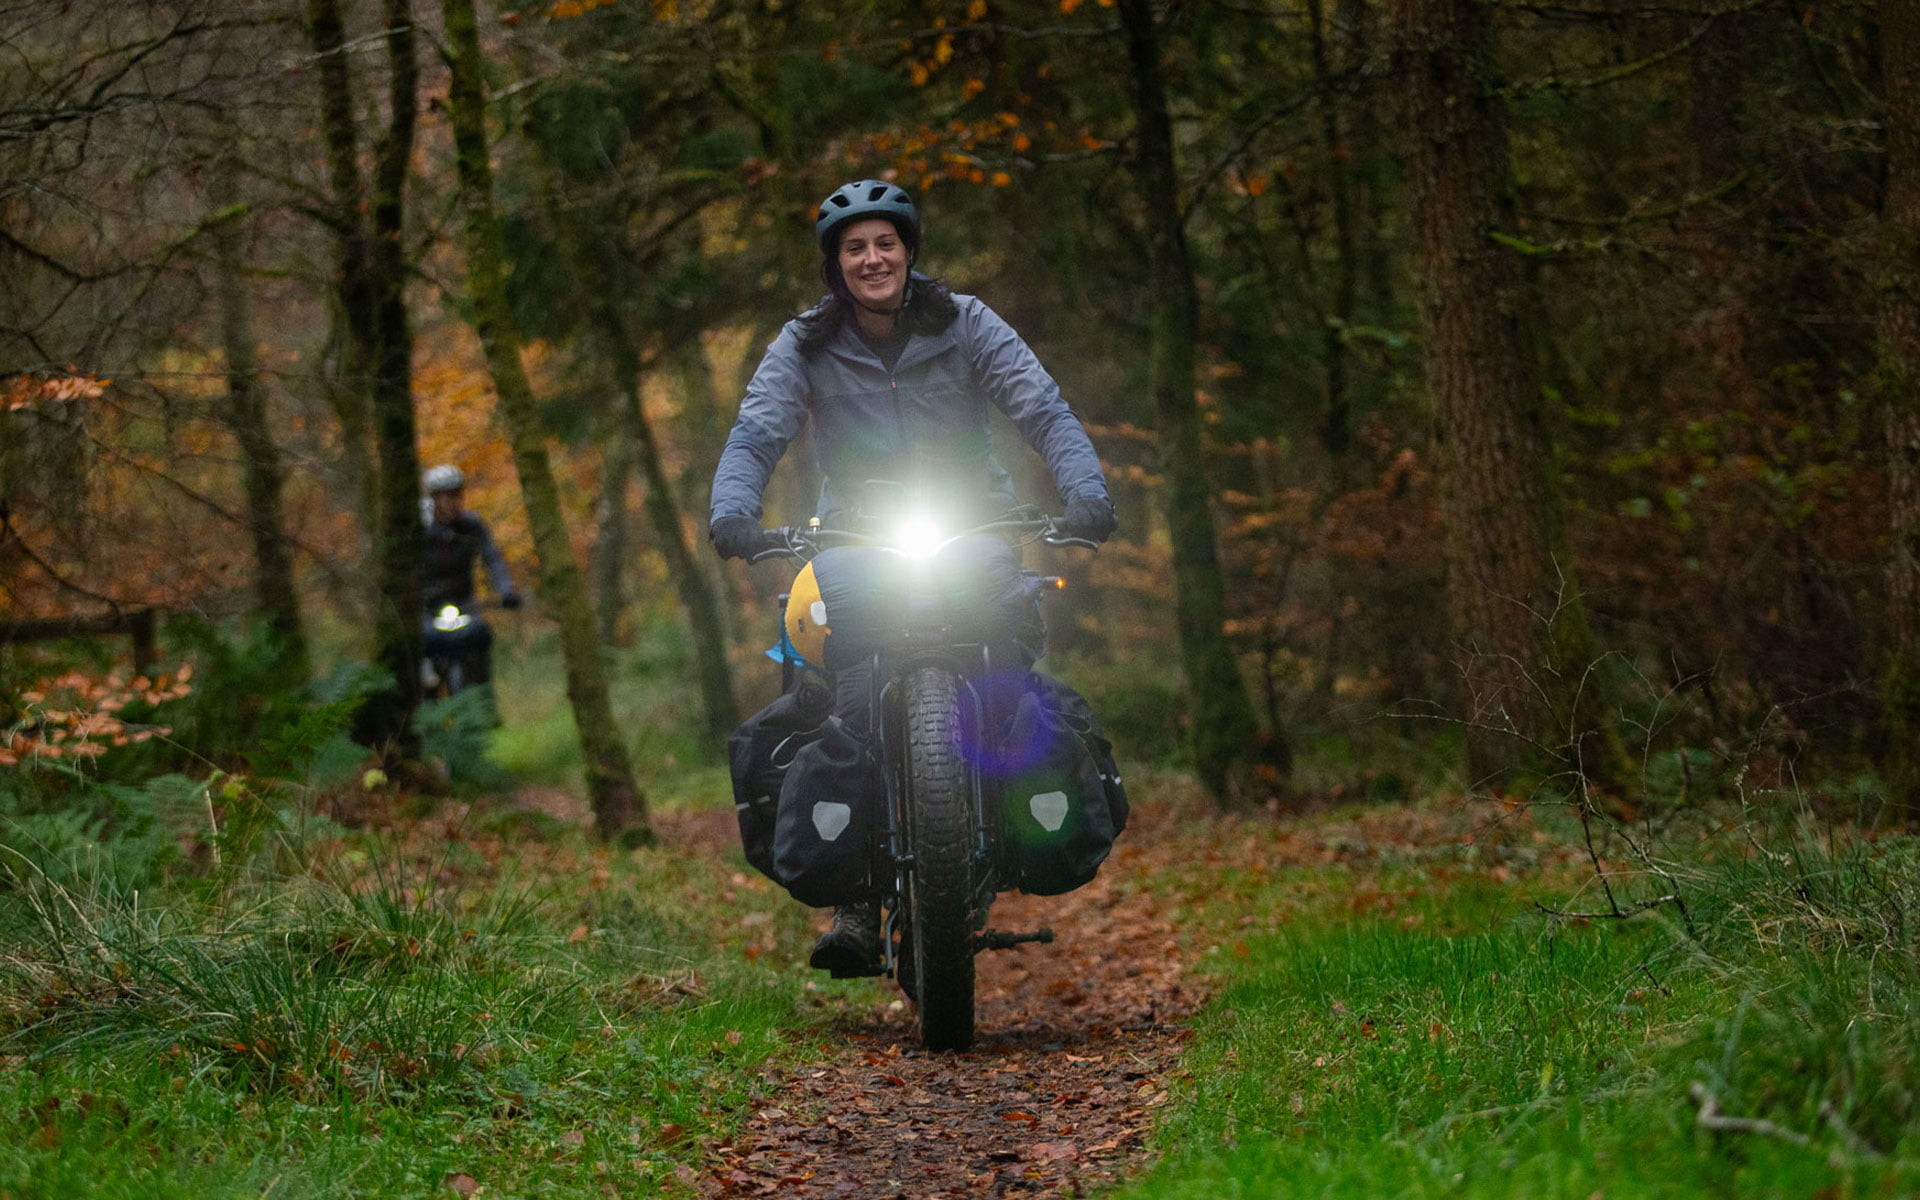 Bike with headlight on, riding in the forest